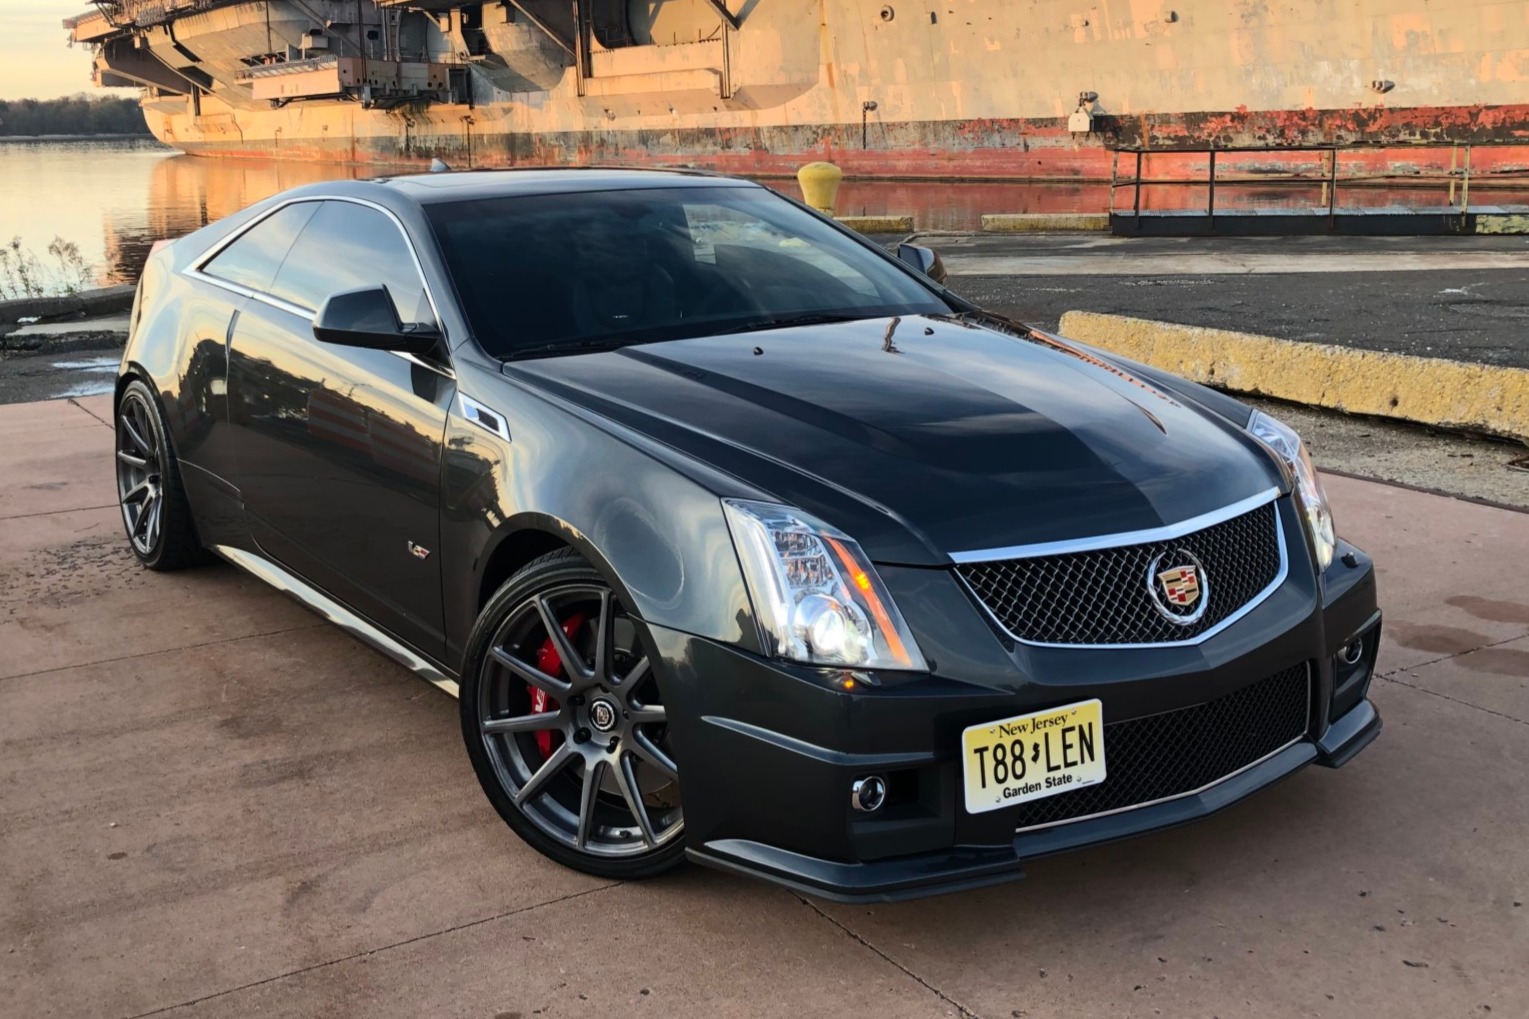 16k-Mile 2015 Cadillac CTS-V Coupe 6-Speed for sale on BaT Auctions -  closed on January 20, 2020 (Lot #27,156) | Bring a Trailer